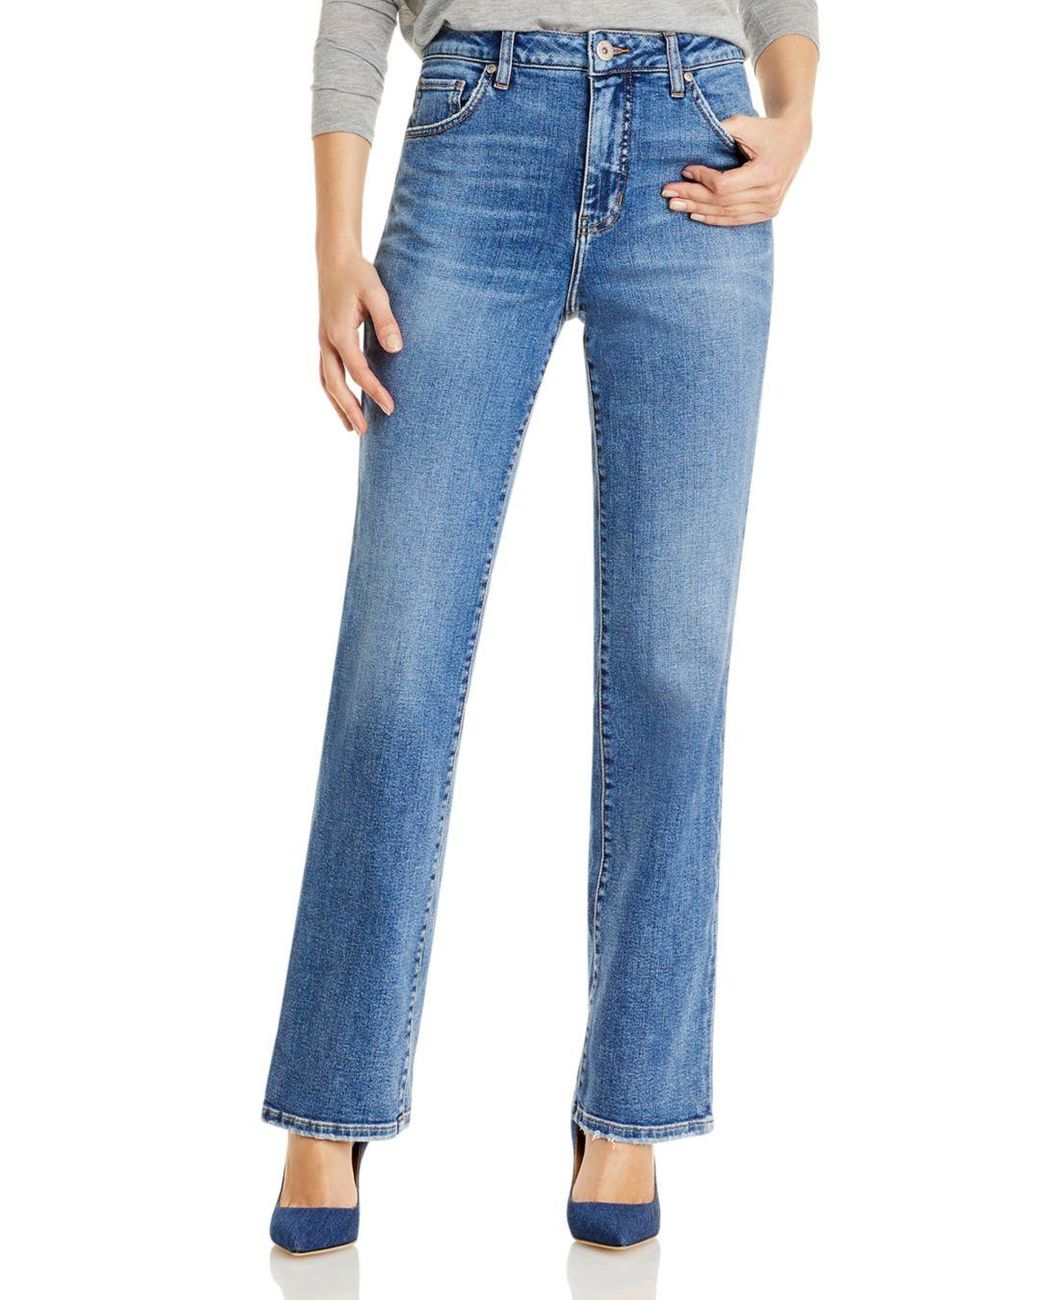 Jag Jeans Denim Phoebe High Rise Relaxed Fit Jeans in Blue - Lyst